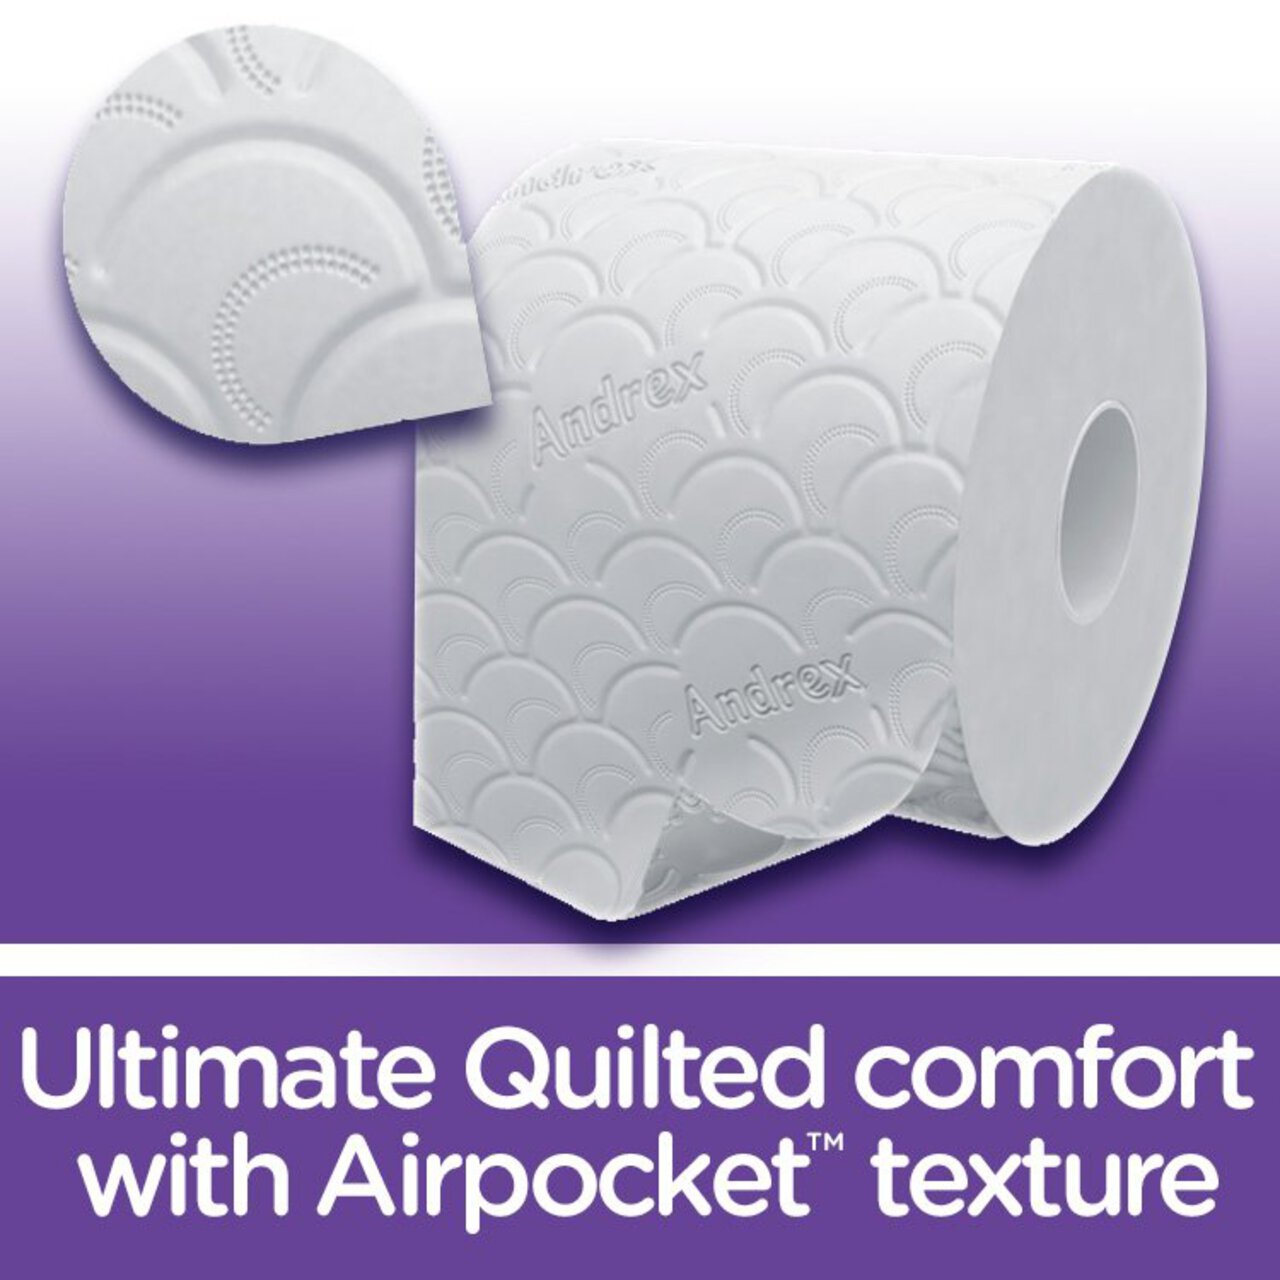 Andrex Supreme Quilts Toilet Roll 4 per pack